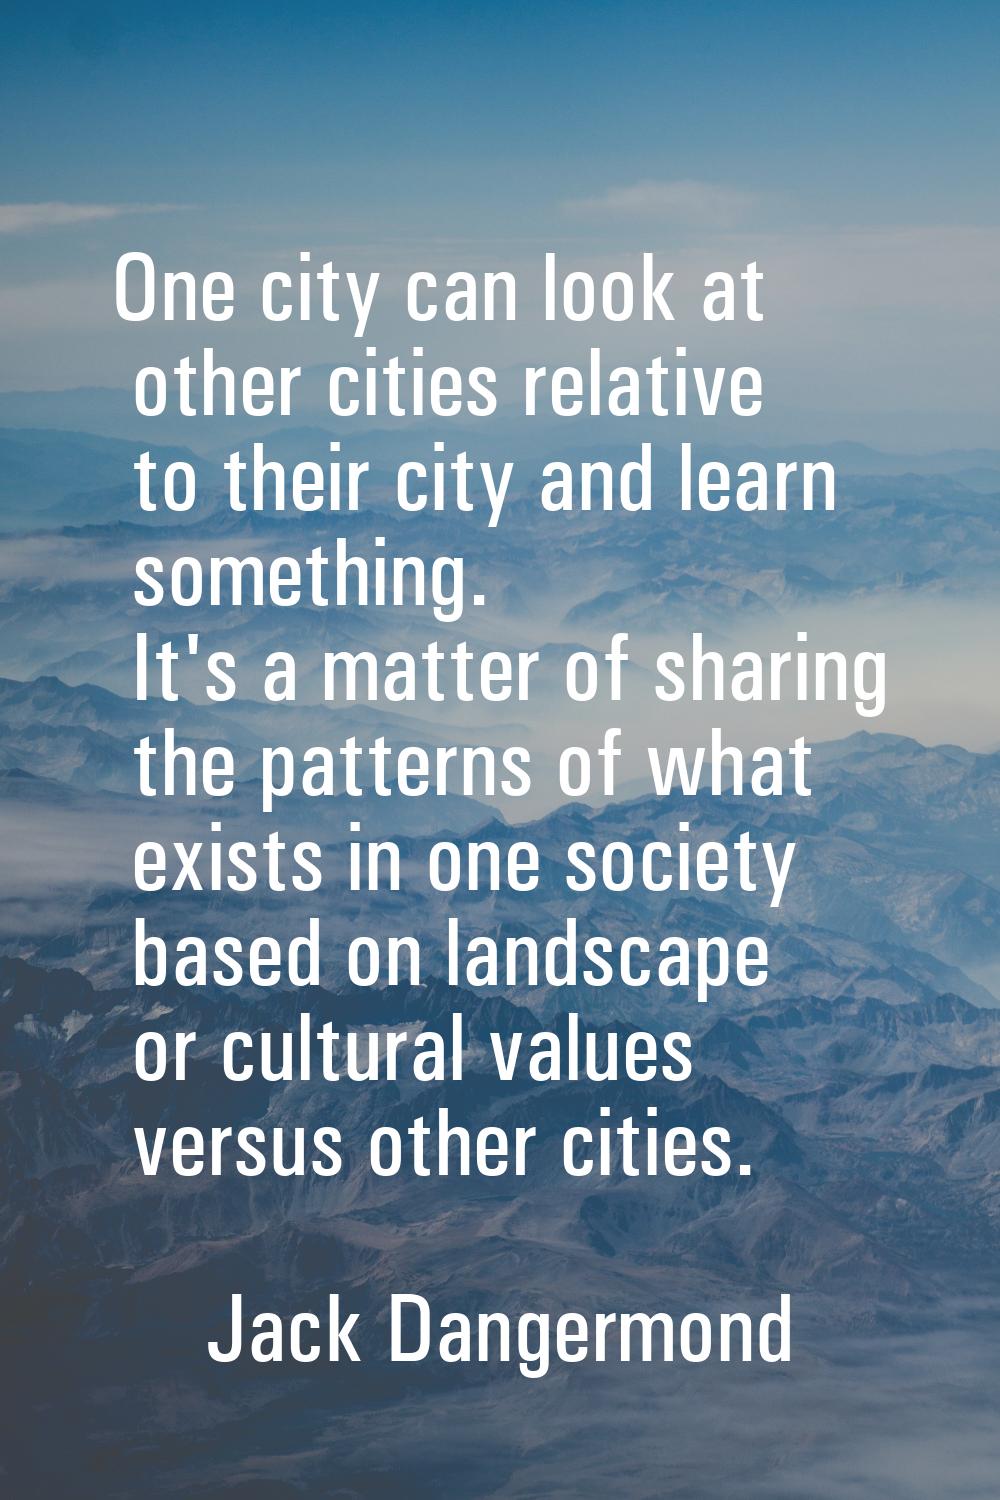 One city can look at other cities relative to their city and learn something. It's a matter of shar